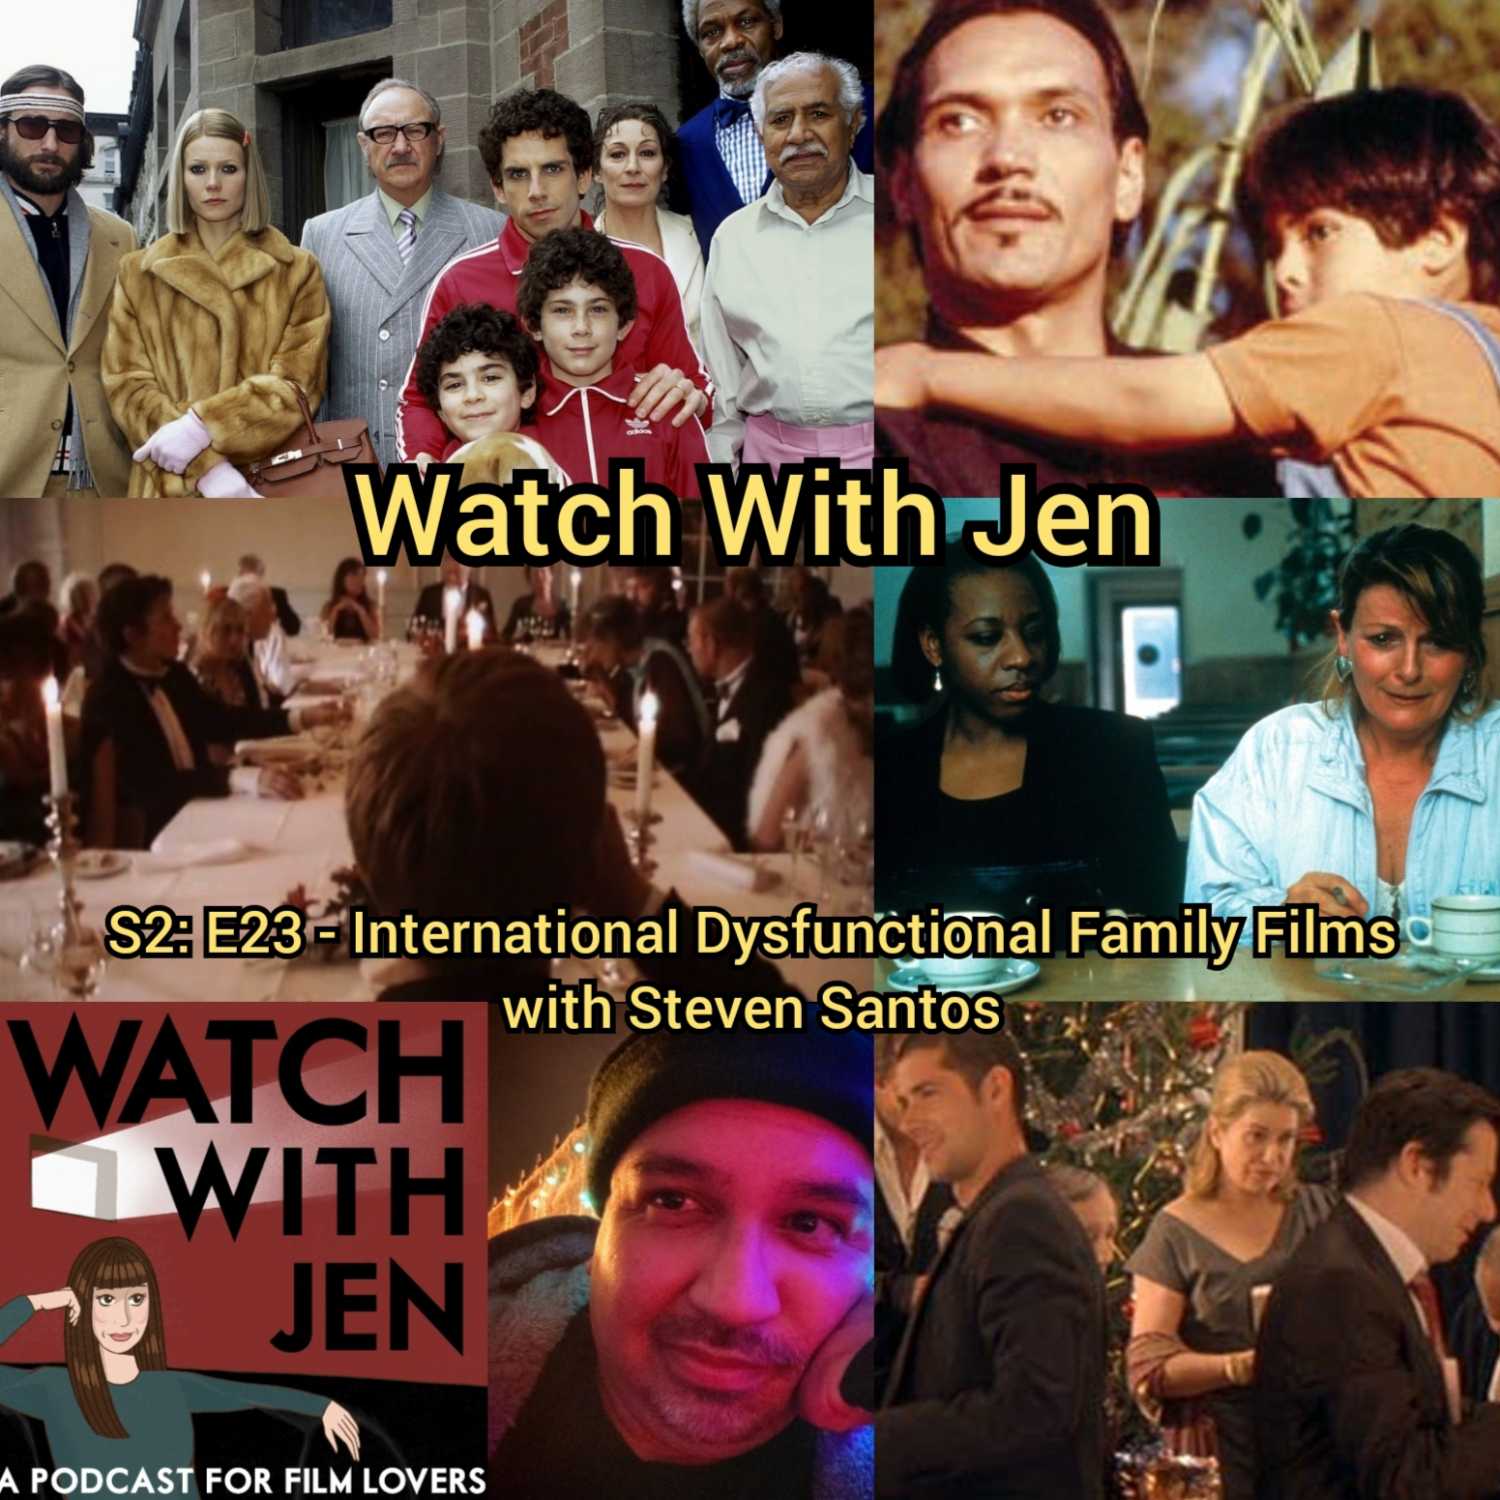 Watch With Jen - S2: E23 - International Dysfunctional Family Films with Steven Santos